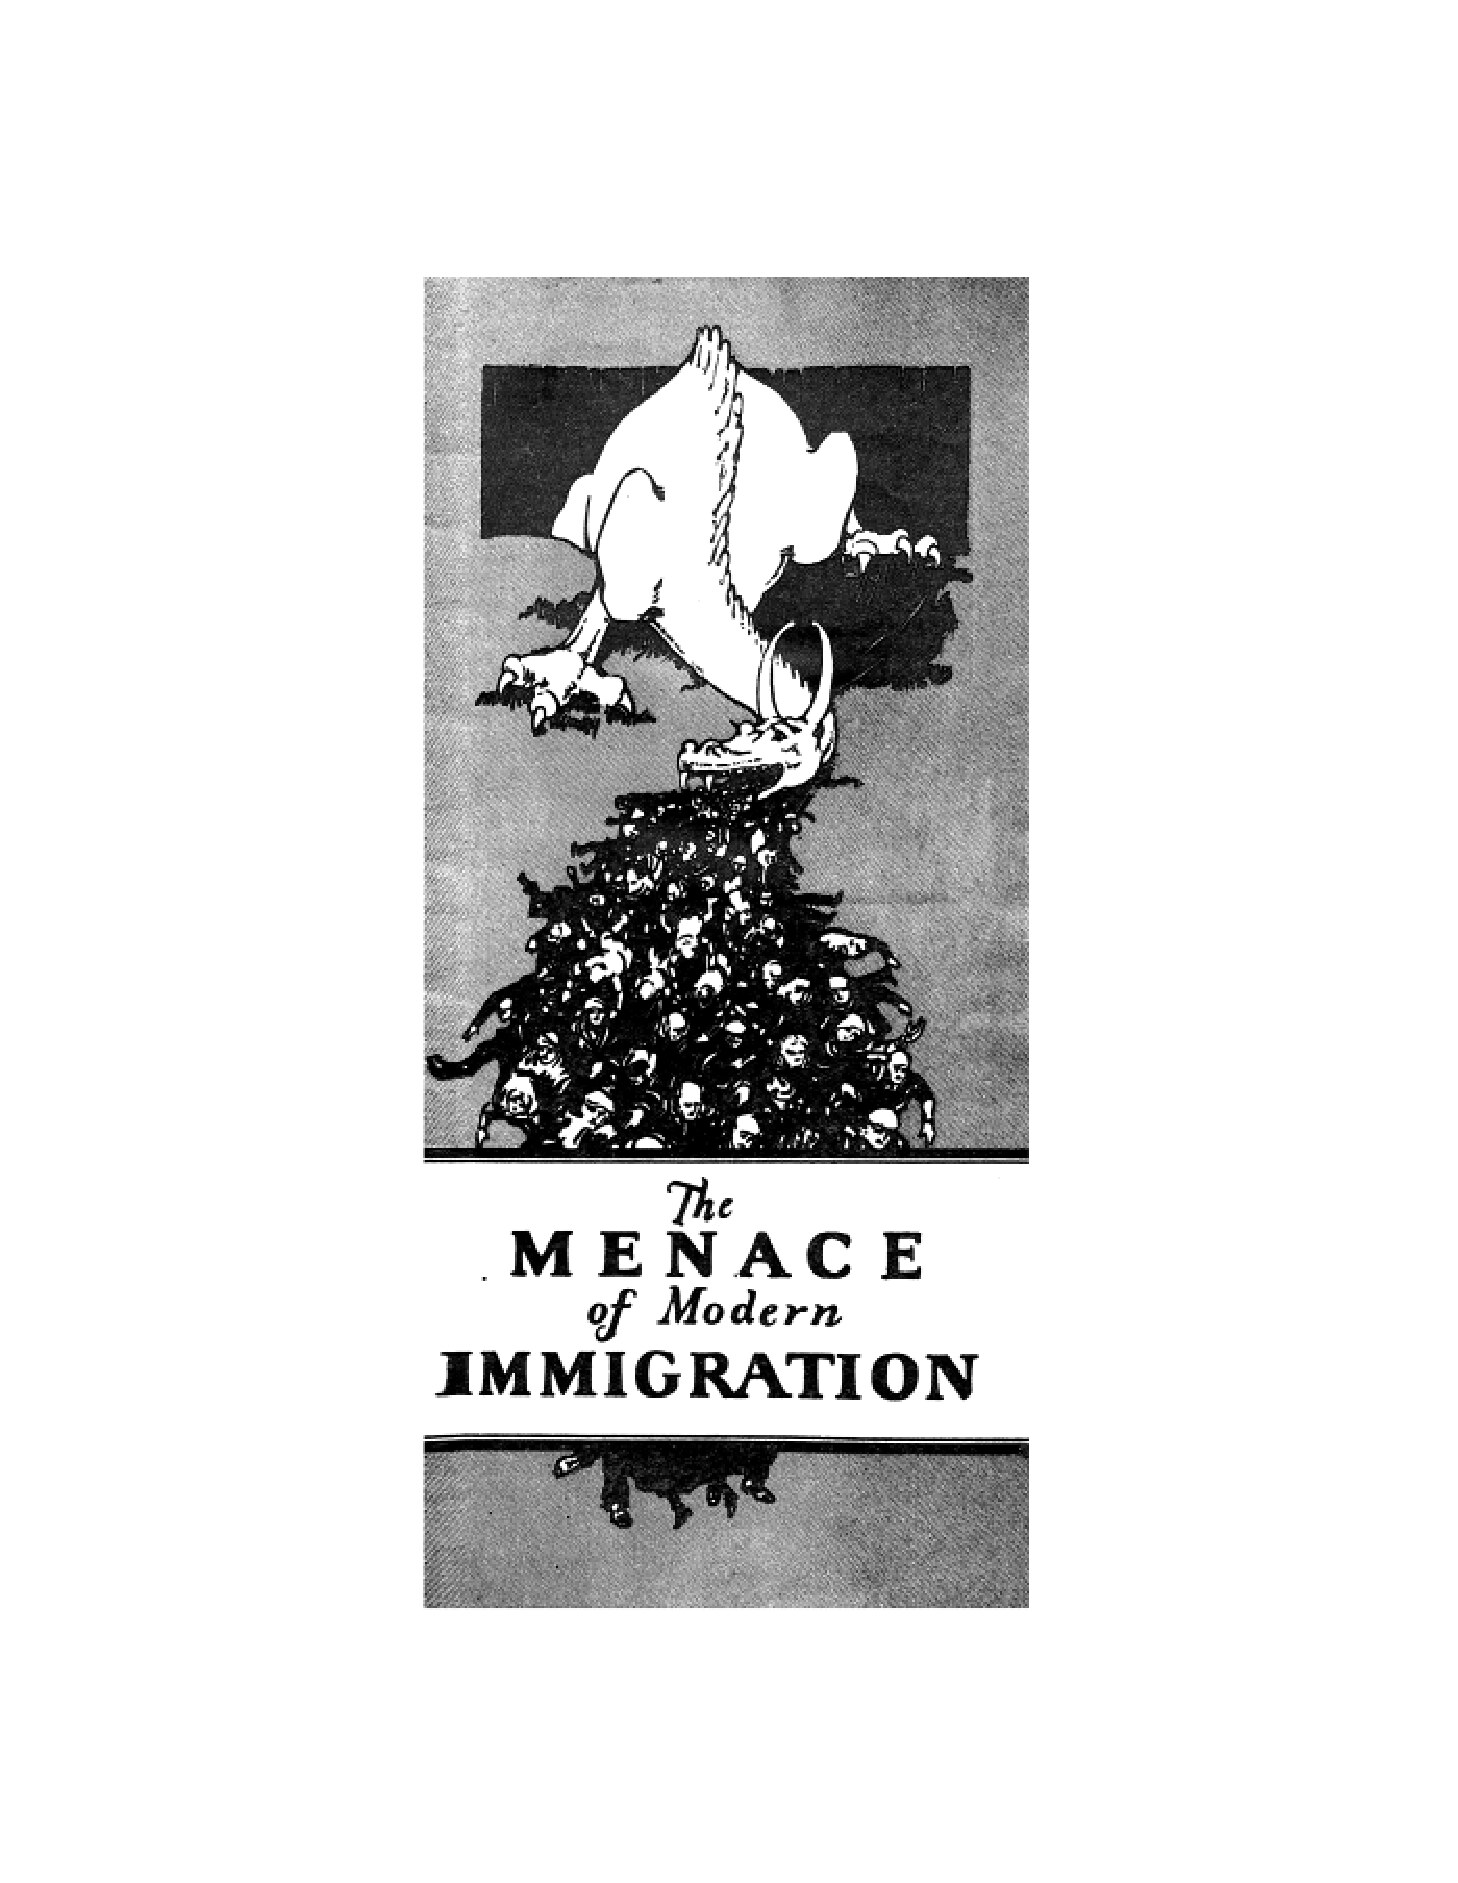 The Menace of Modern Immigration